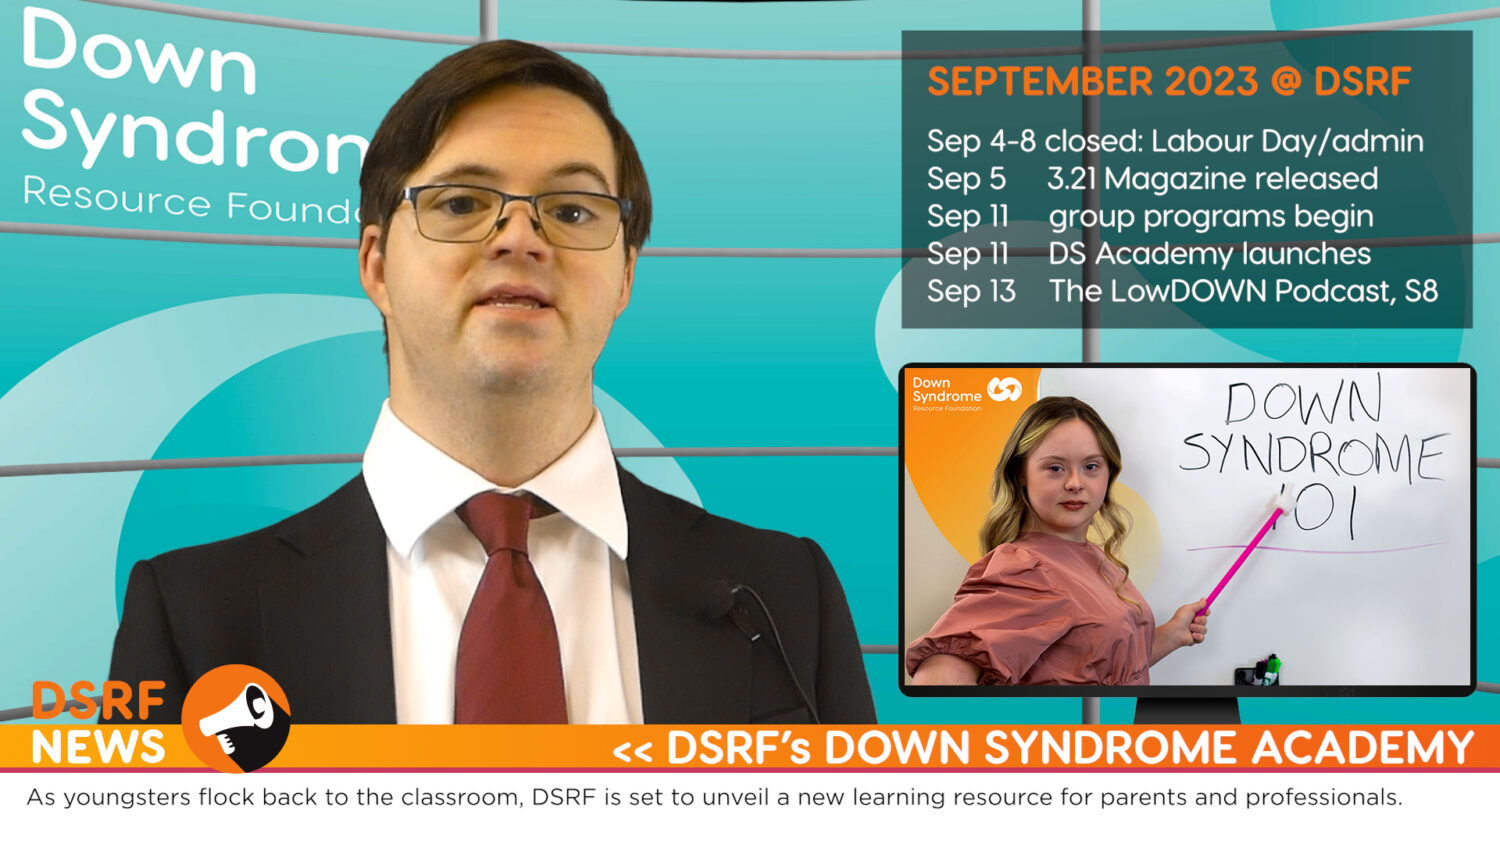 white man with Down syndrome, with brown hair, glasses, black suit jacket and red tie, delivers news at a virtual news desk